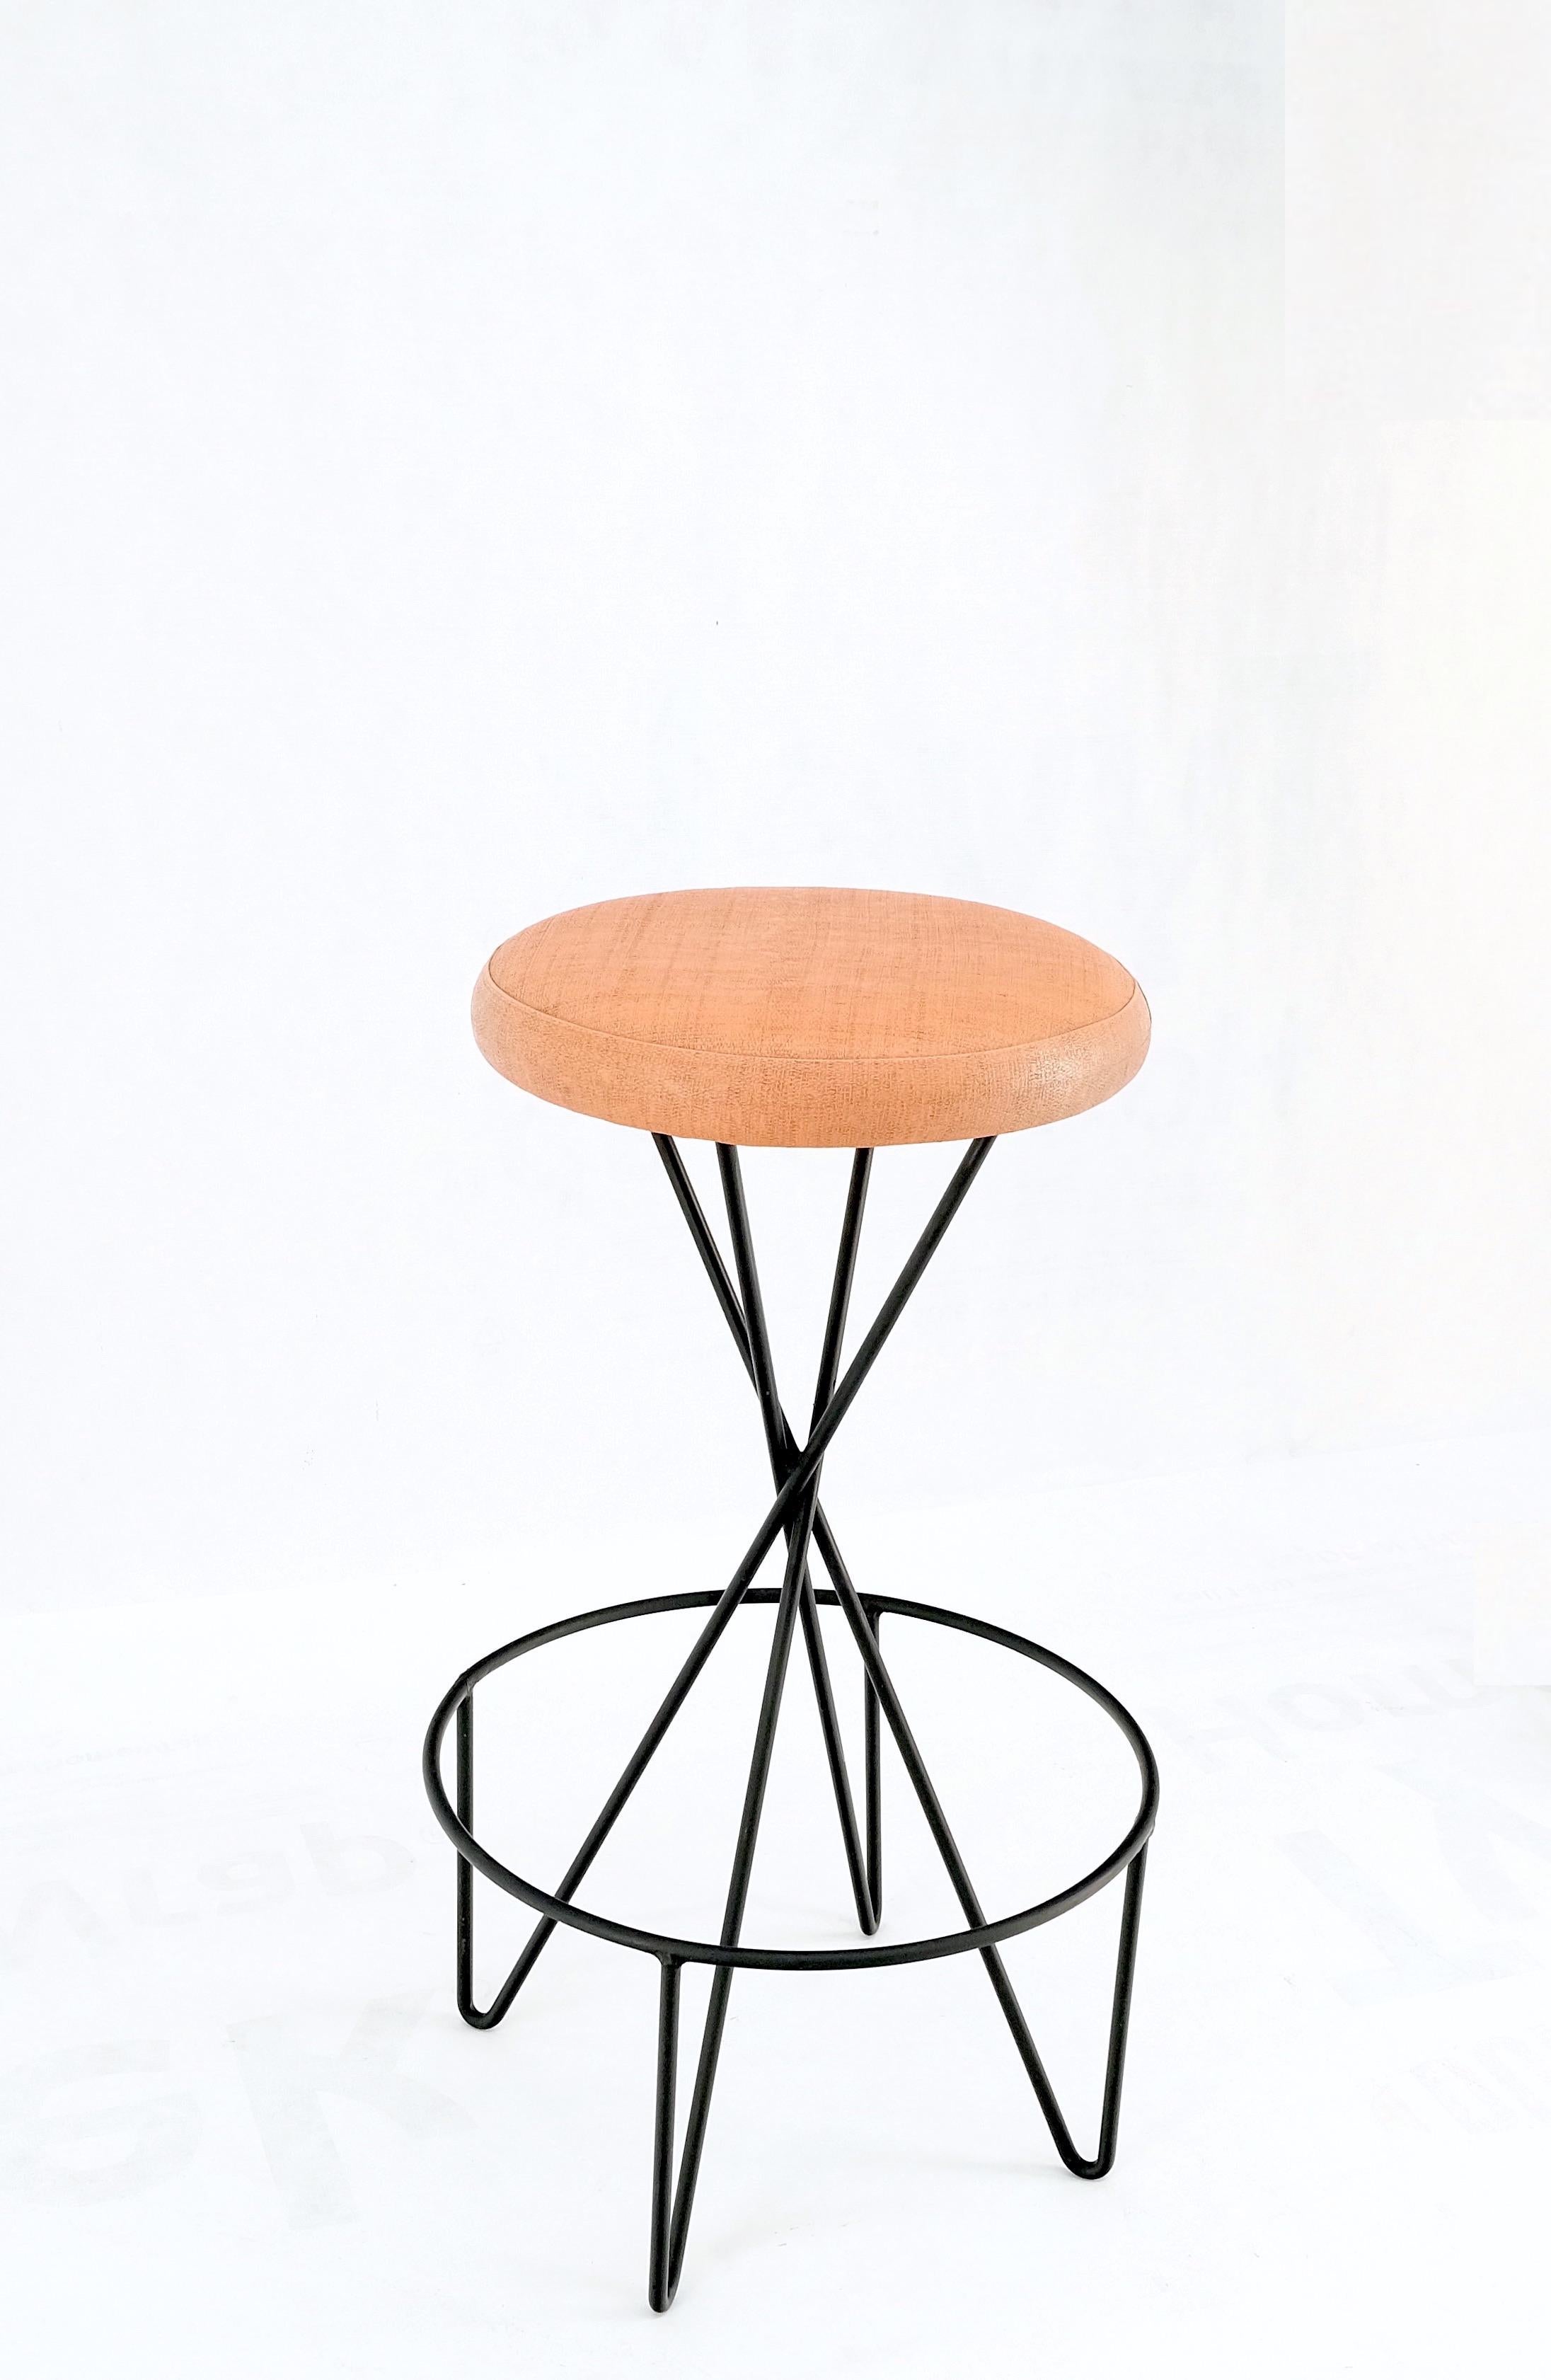 American Frederick Weiberg Mid-Century Modern Wire Base Round Seat Bar Stool, circa 1970s For Sale